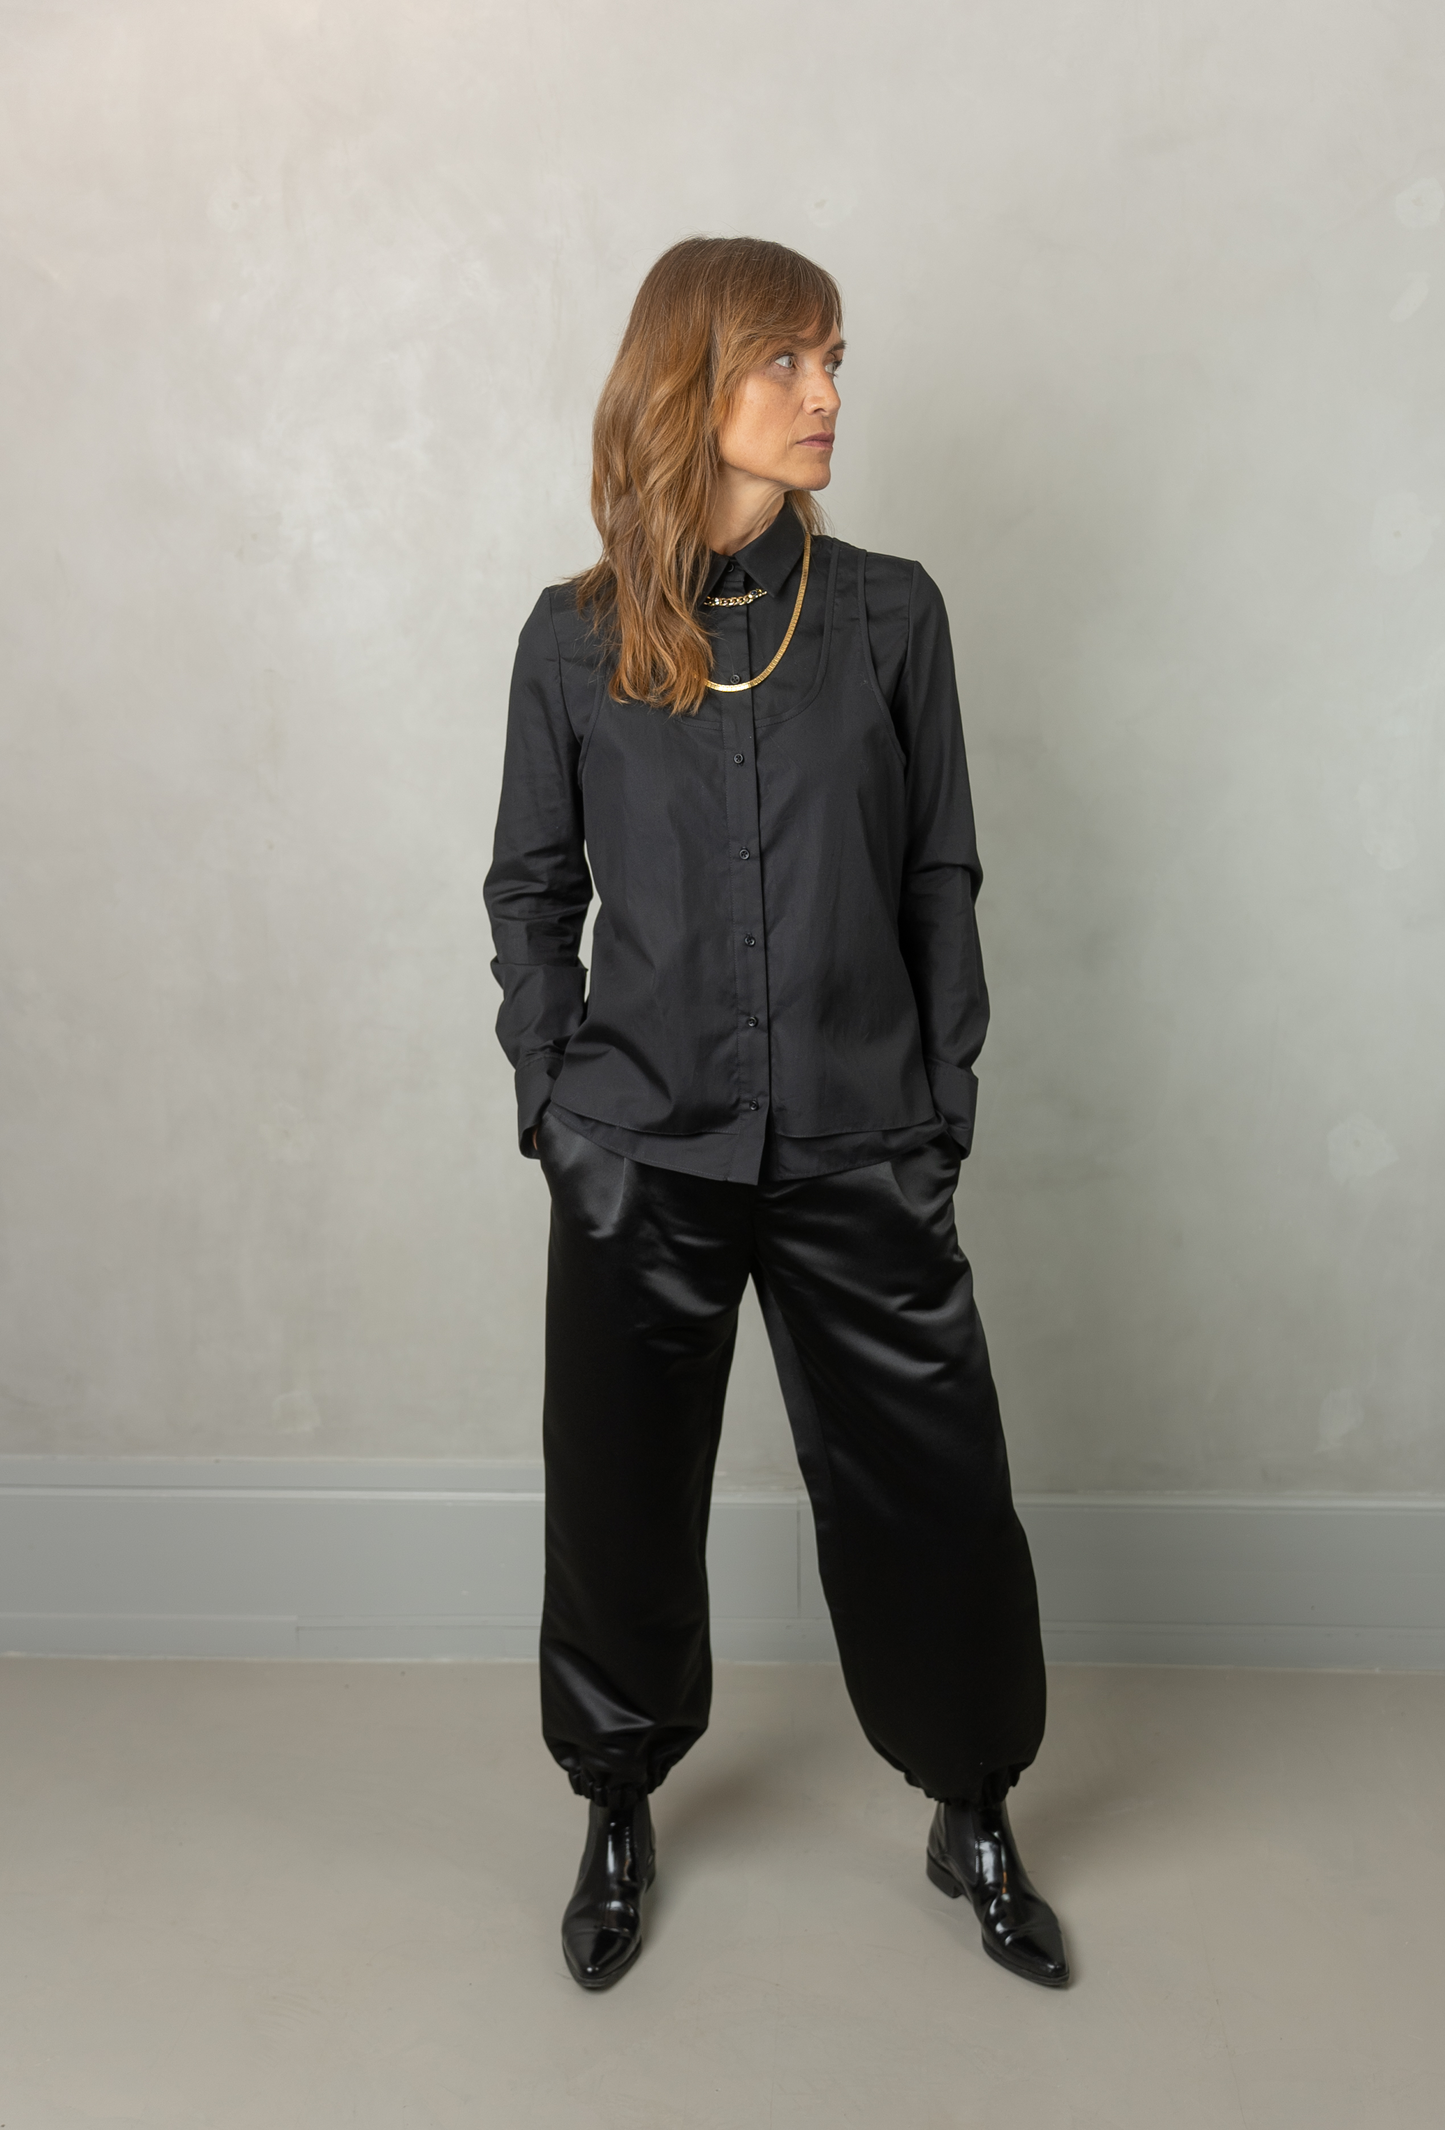 Women wearing Abbey shirt black paired with Agnes trousers (black) against a grey wall.